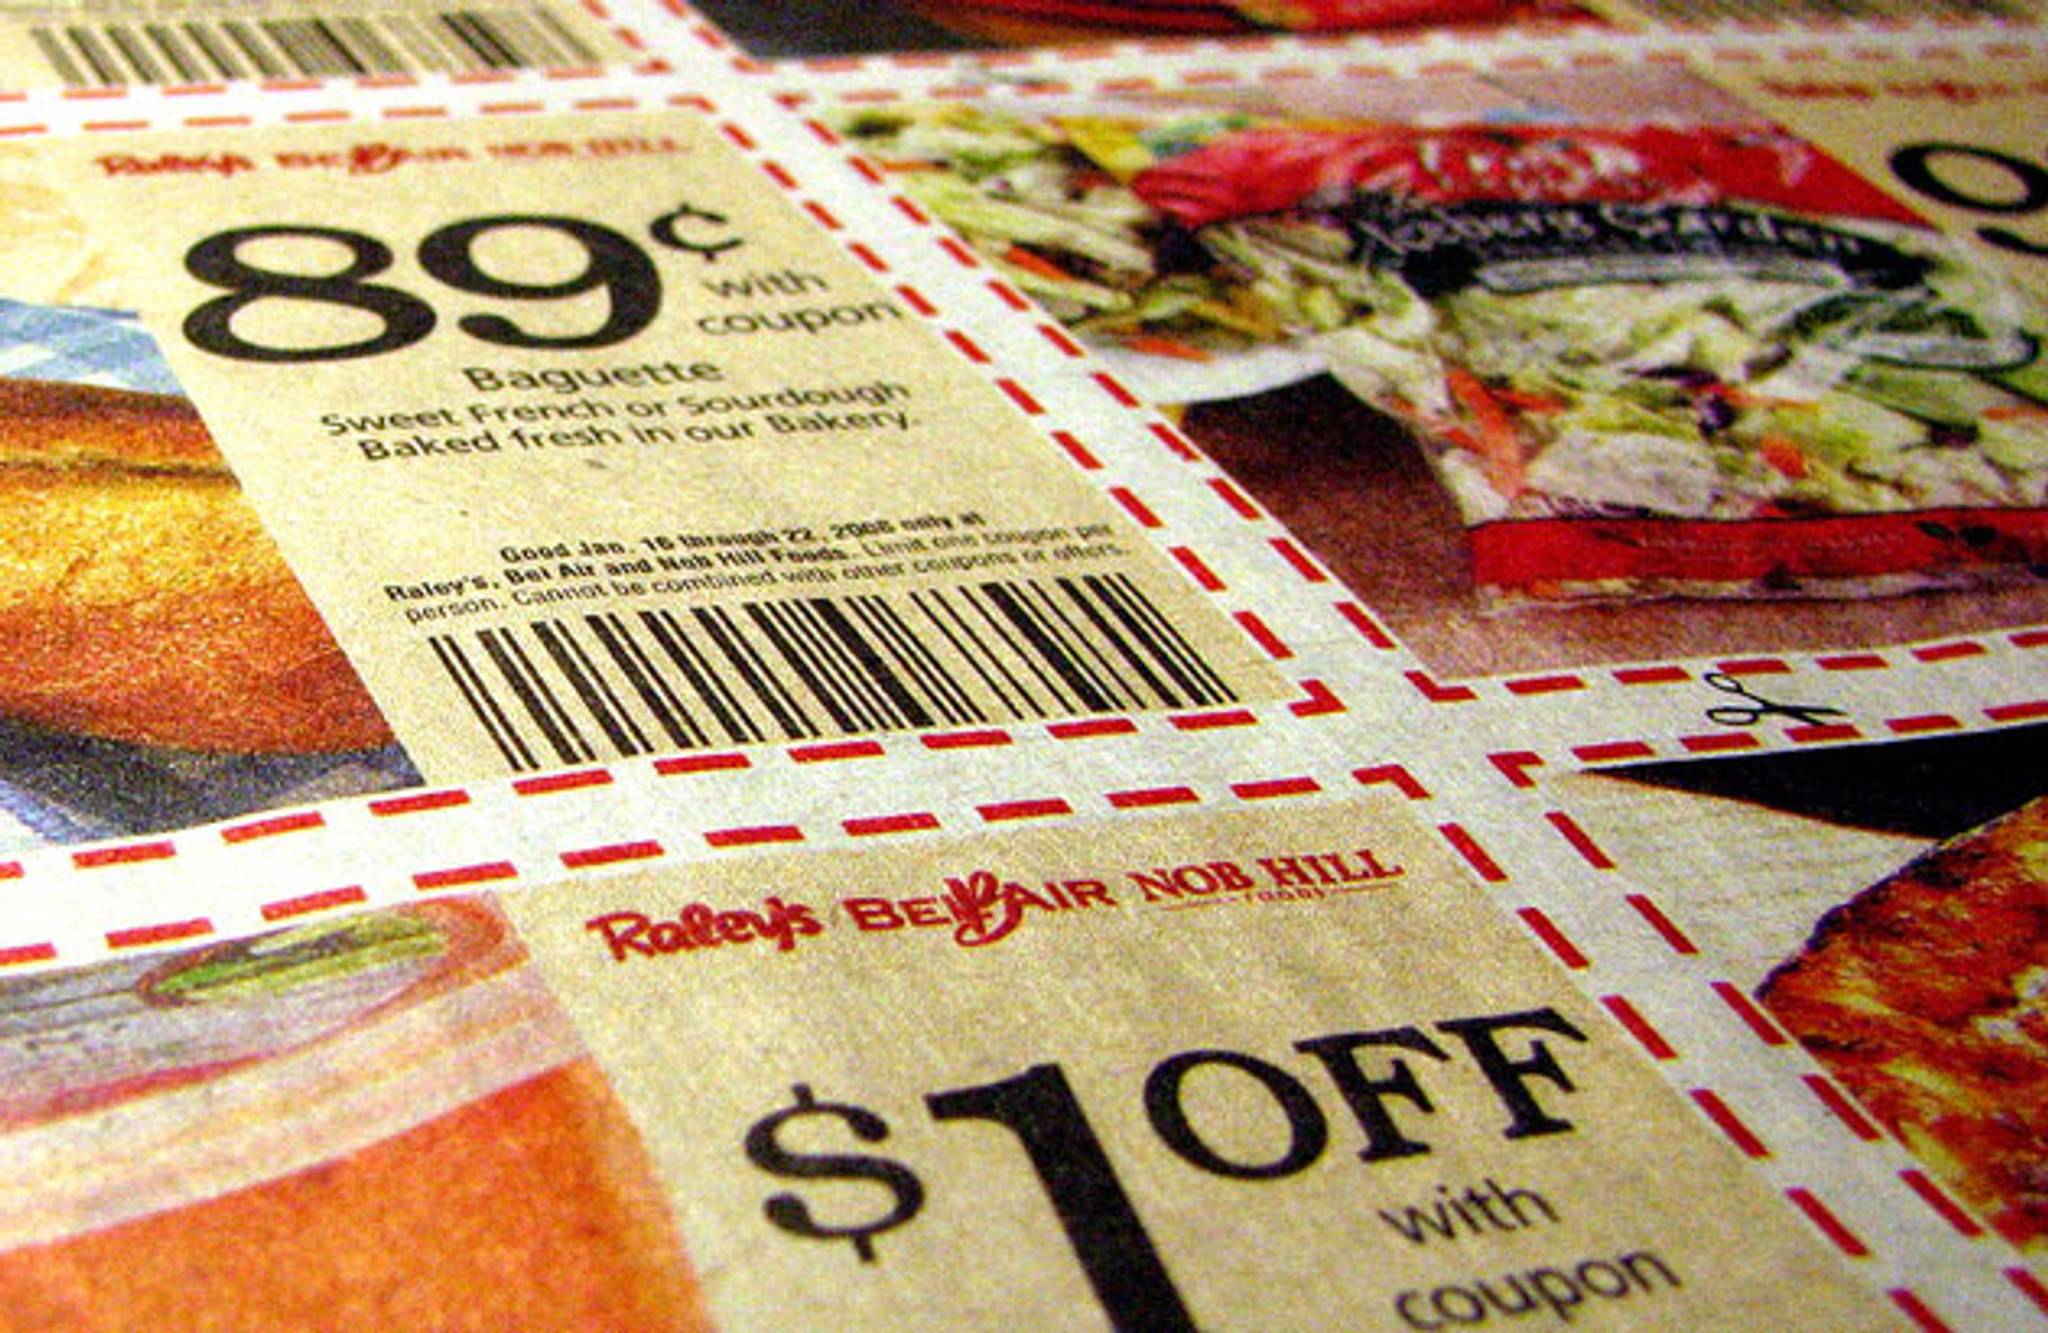 Clip and save: coupon culture and brand affinity